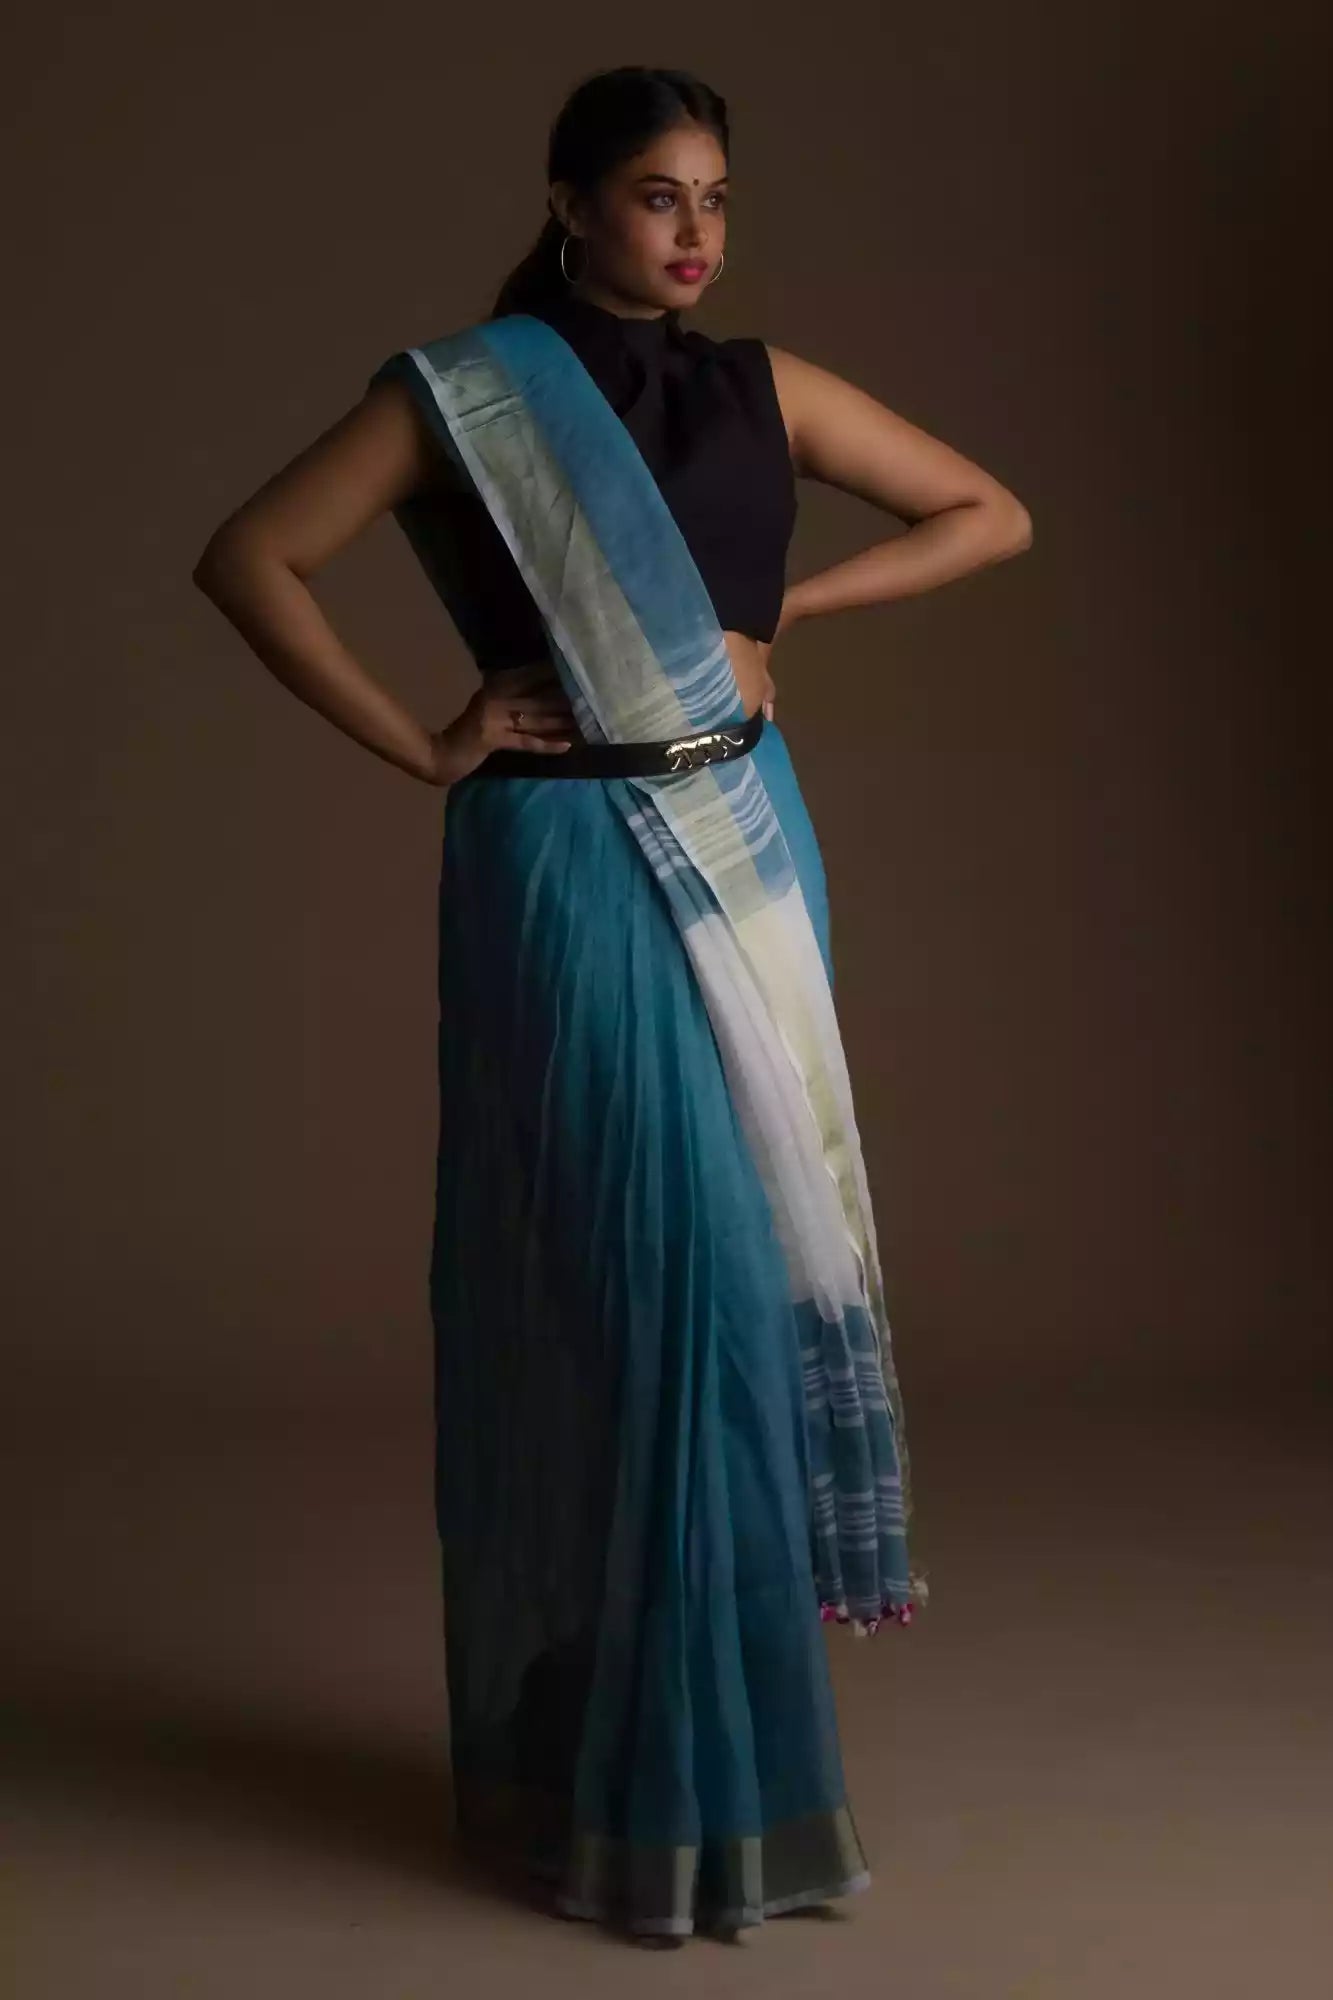 woman wearing a blue saree and a black blouse with stripes at the border and a belt in front of a beige backdrop